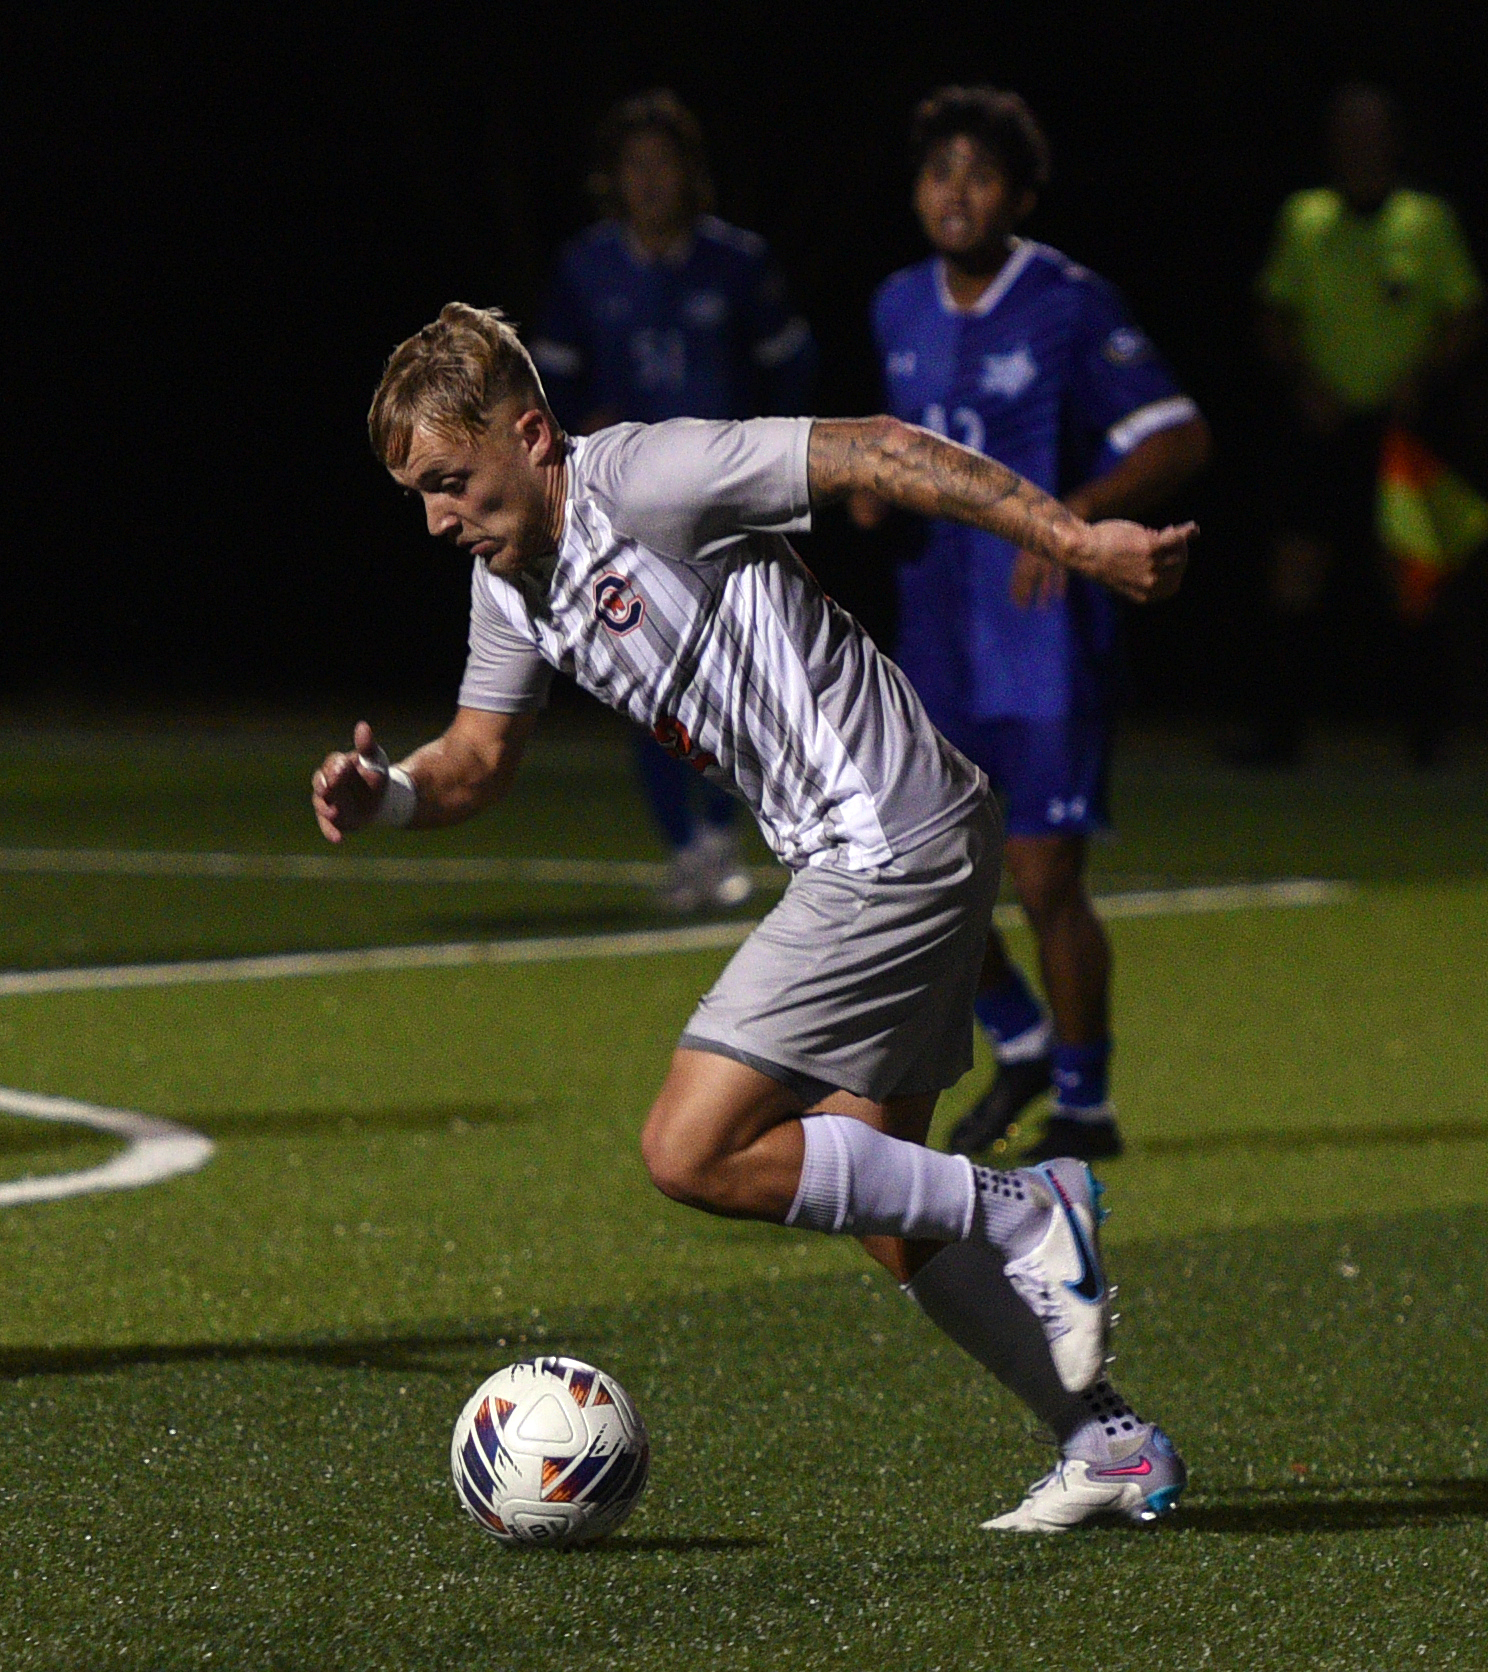 Eagles look to ride momentum into SAC quarterfinals against top-seeded Wingate